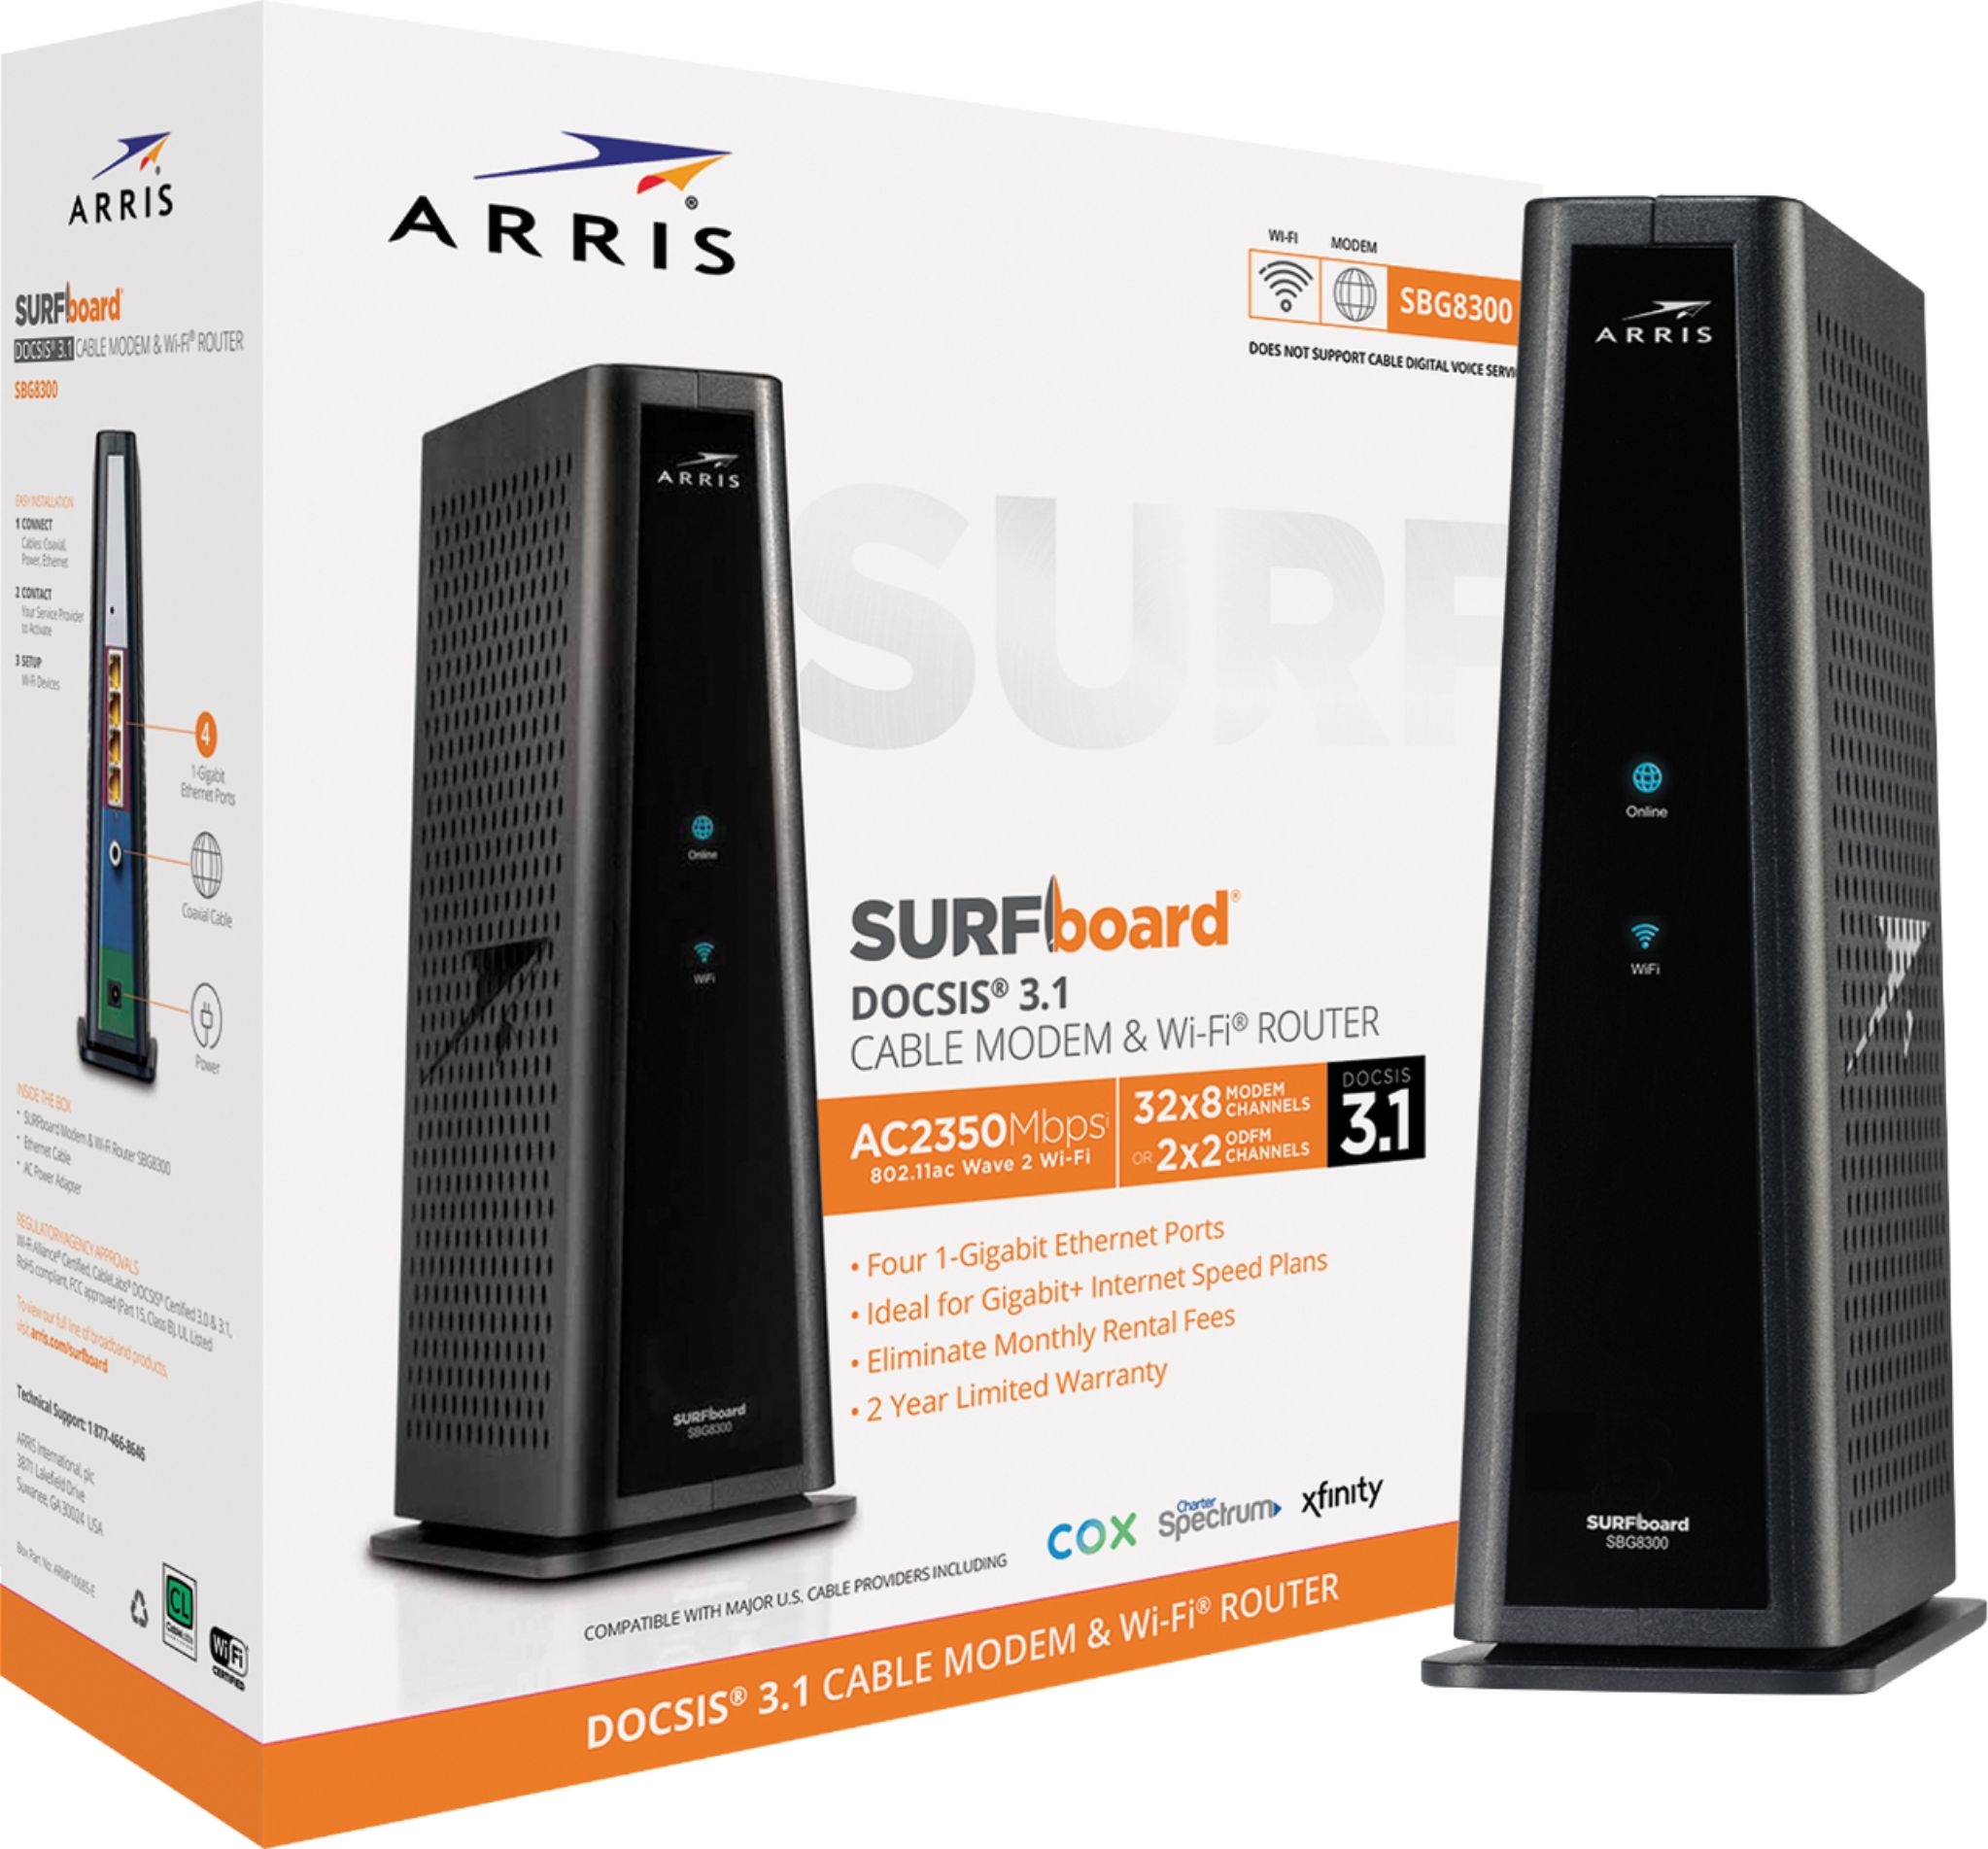 ARRIS - SURFboard DOCSIS 28.28 Cable Modem & Dual-Band Wi-Fi Router for  Xfinity and Cox service tiers - Black